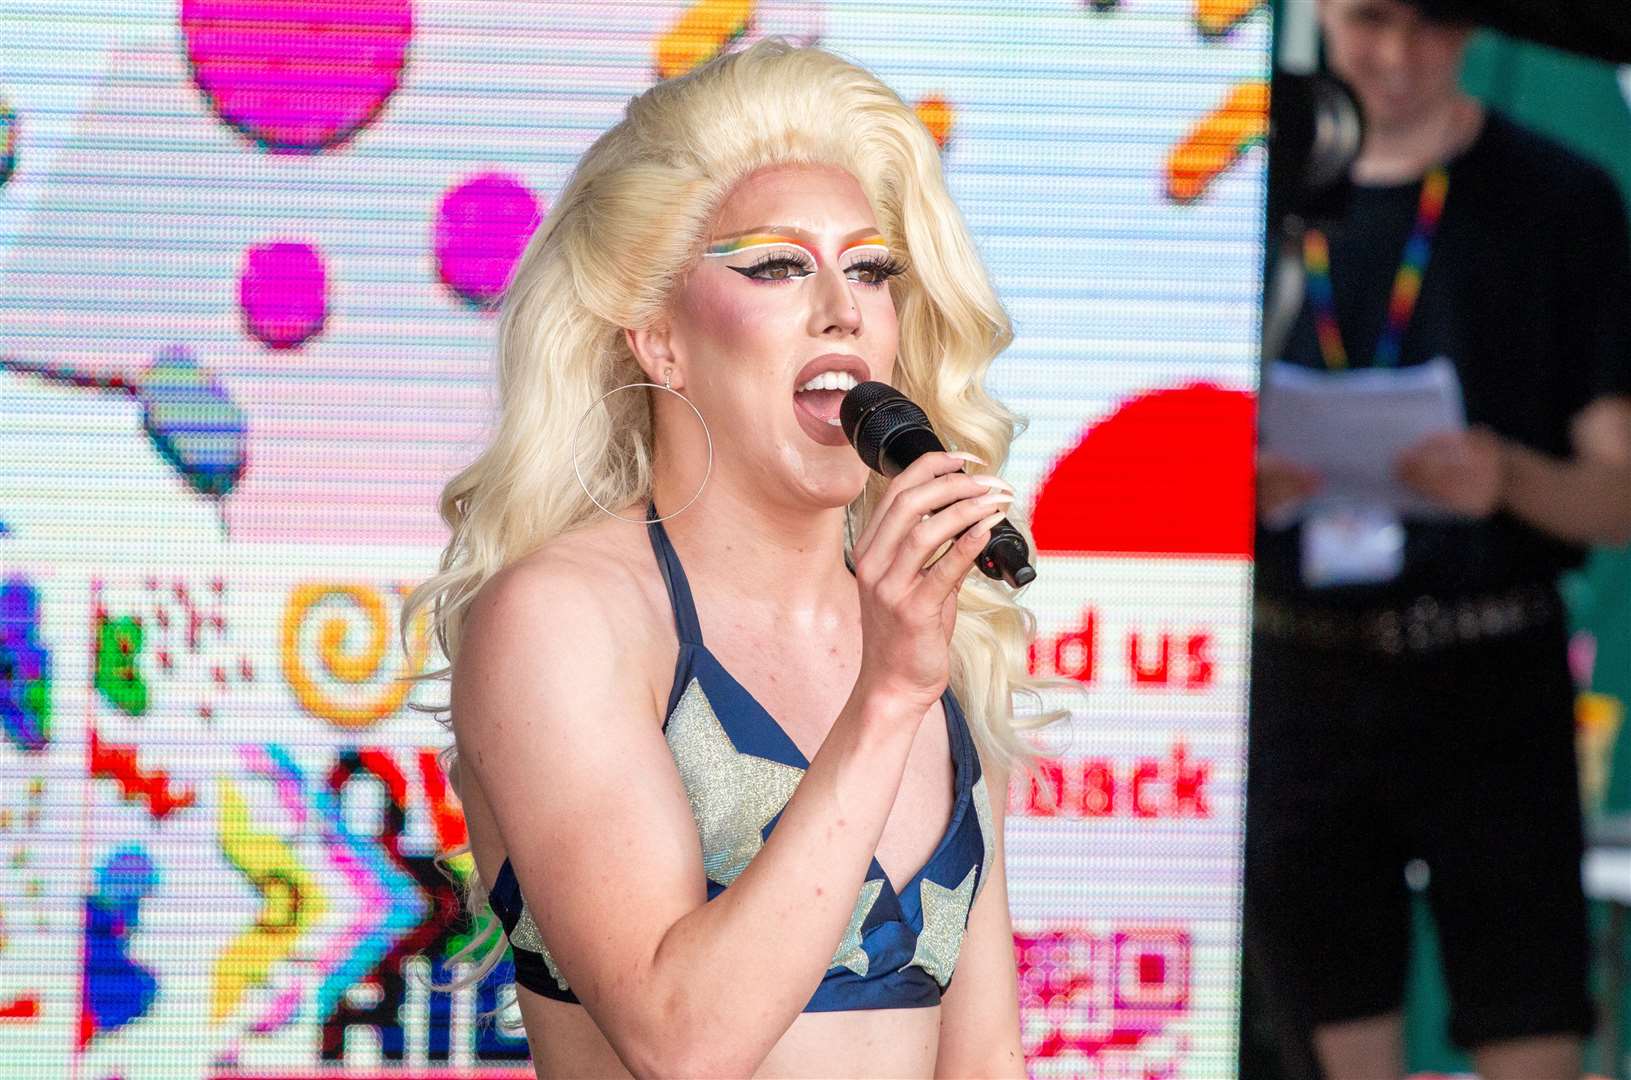 Sophia Stardust performed on the Main Stage. Picture: David Goodson/Dover Pride